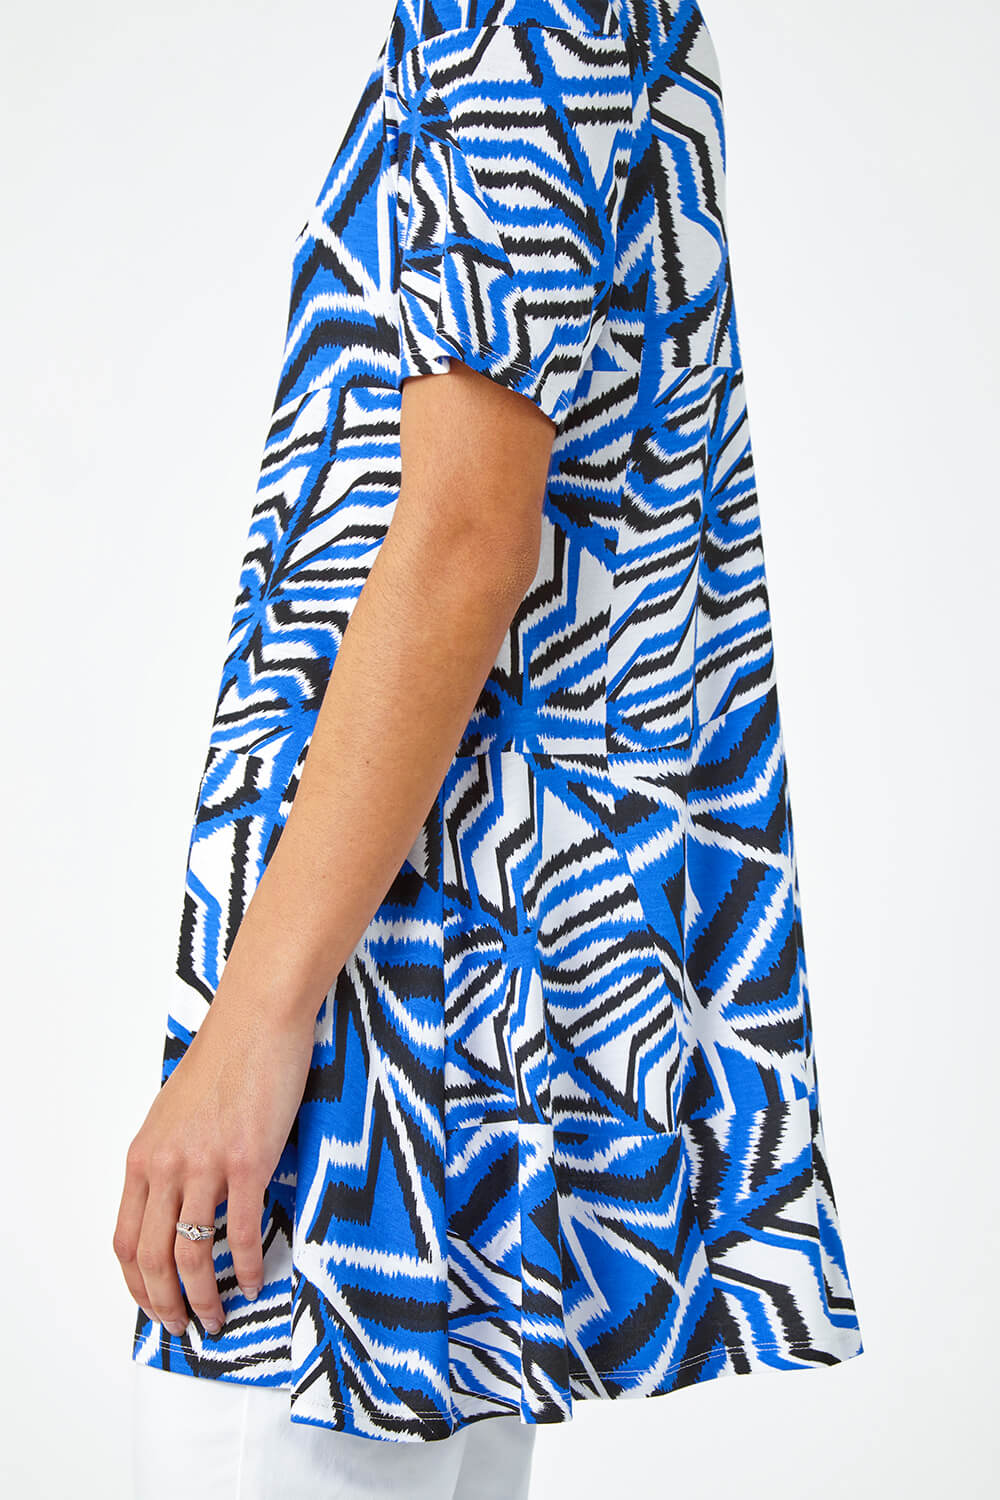 Blue Abstract Print Jersey Tunic Top, Image 5 of 5